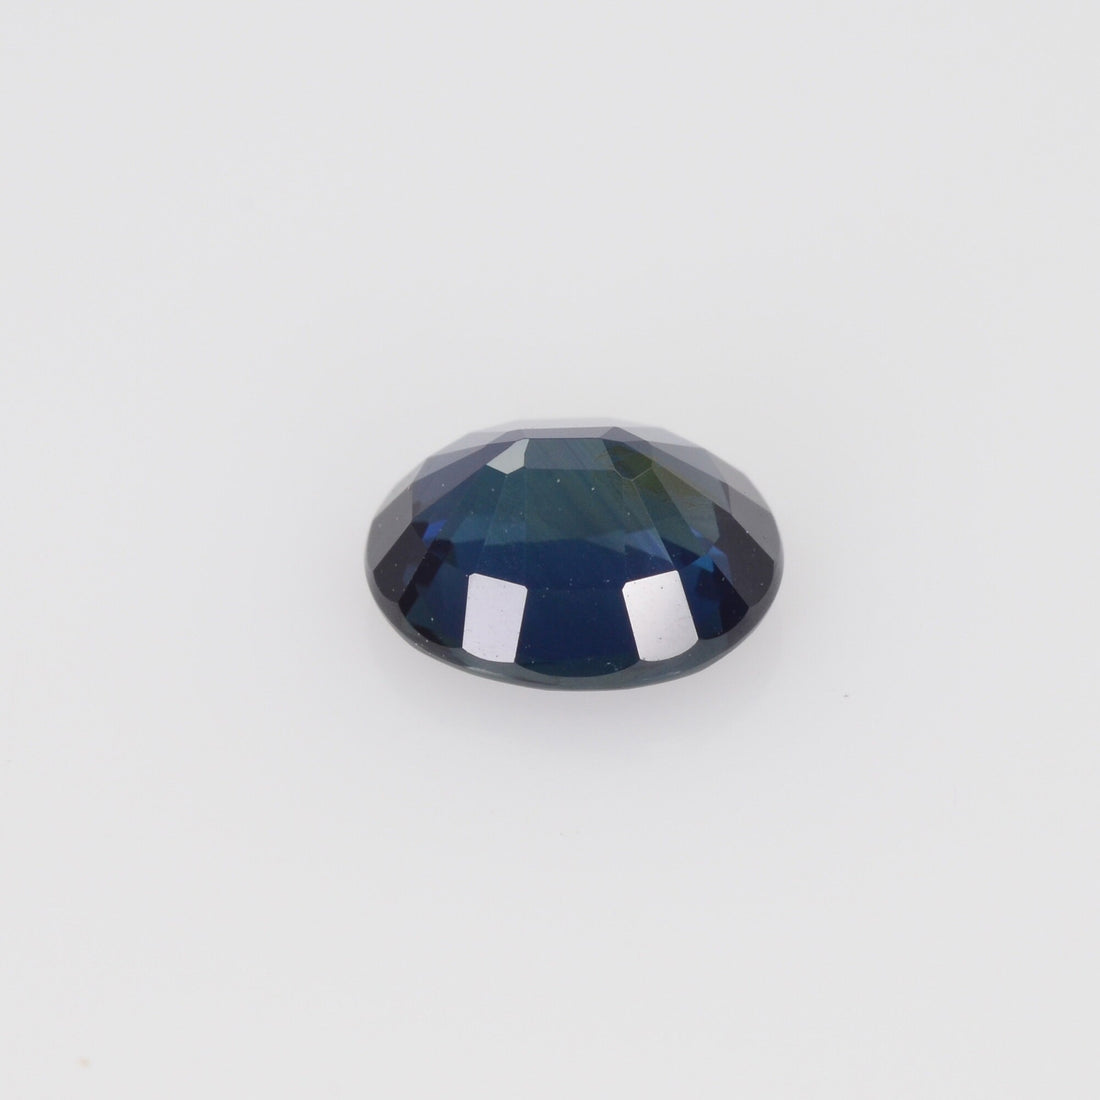 1.10 cts Natural Teal Blue Sapphire Loose Gemstone Oval Cut